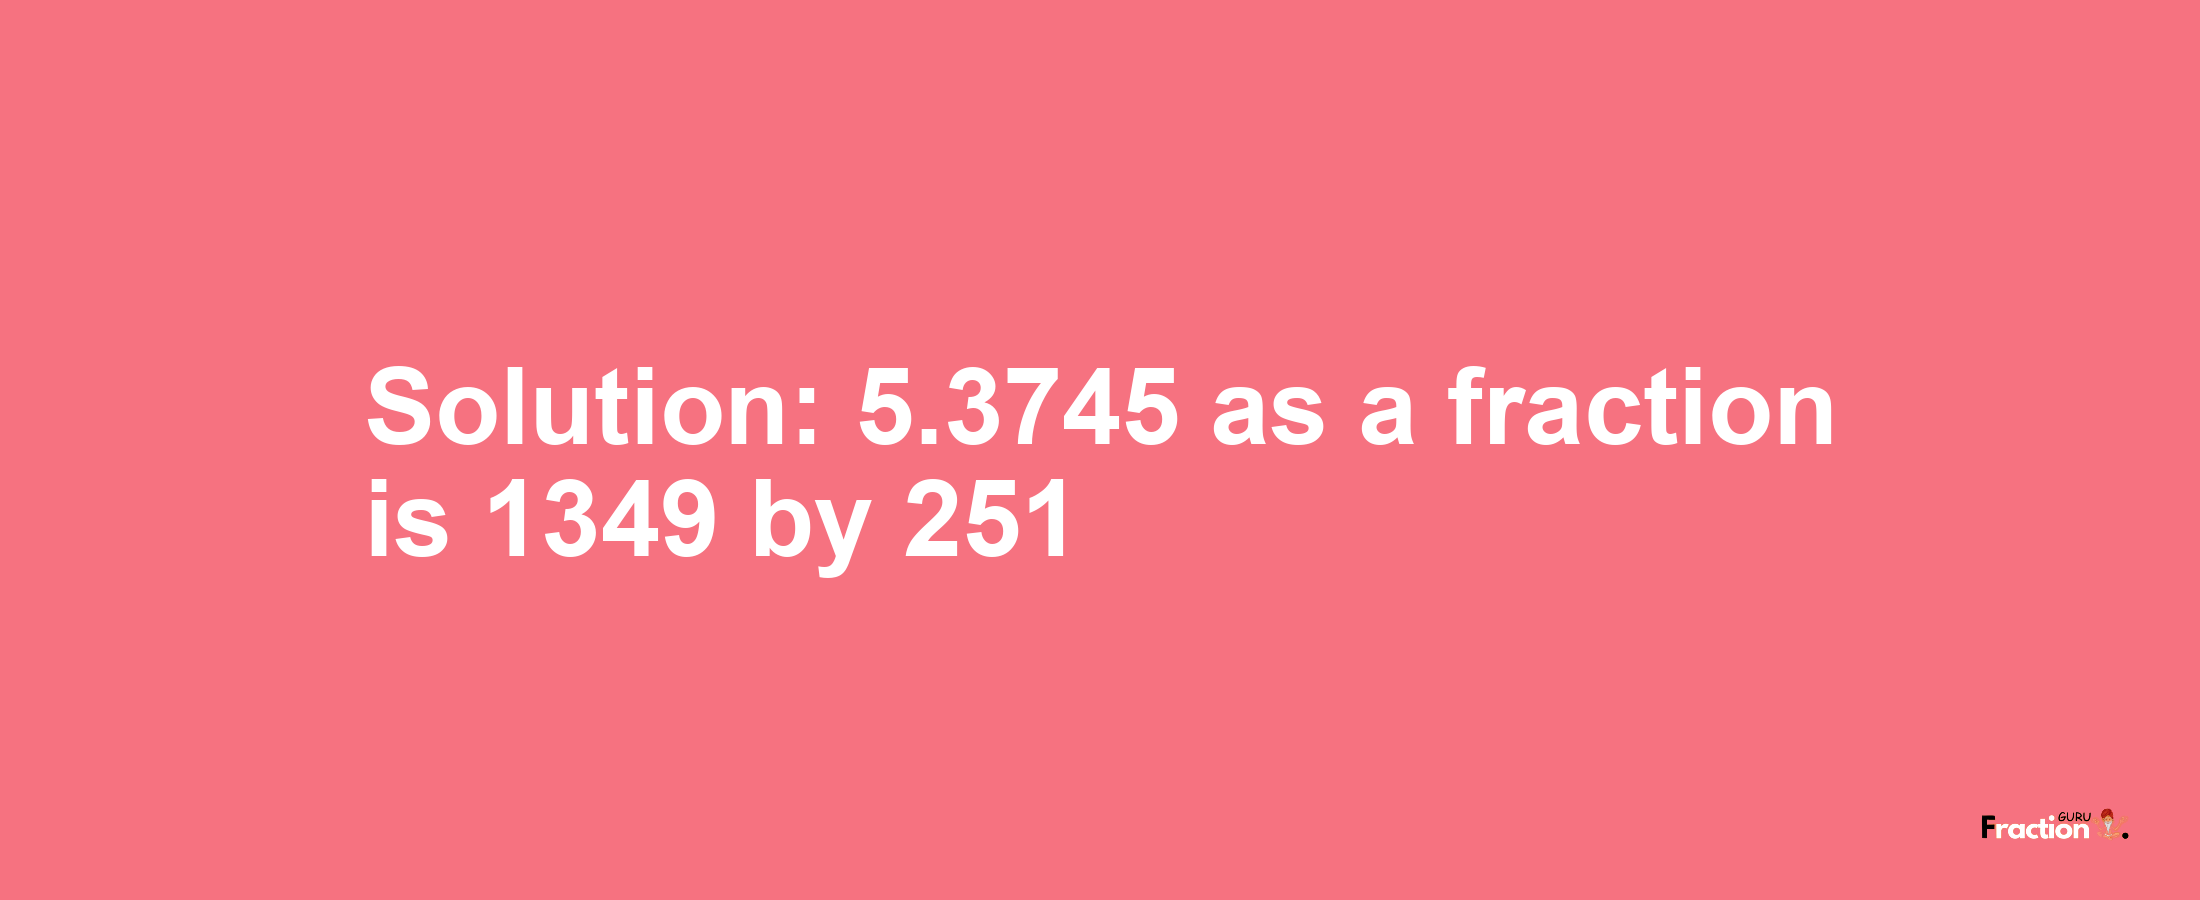 Solution:5.3745 as a fraction is 1349/251